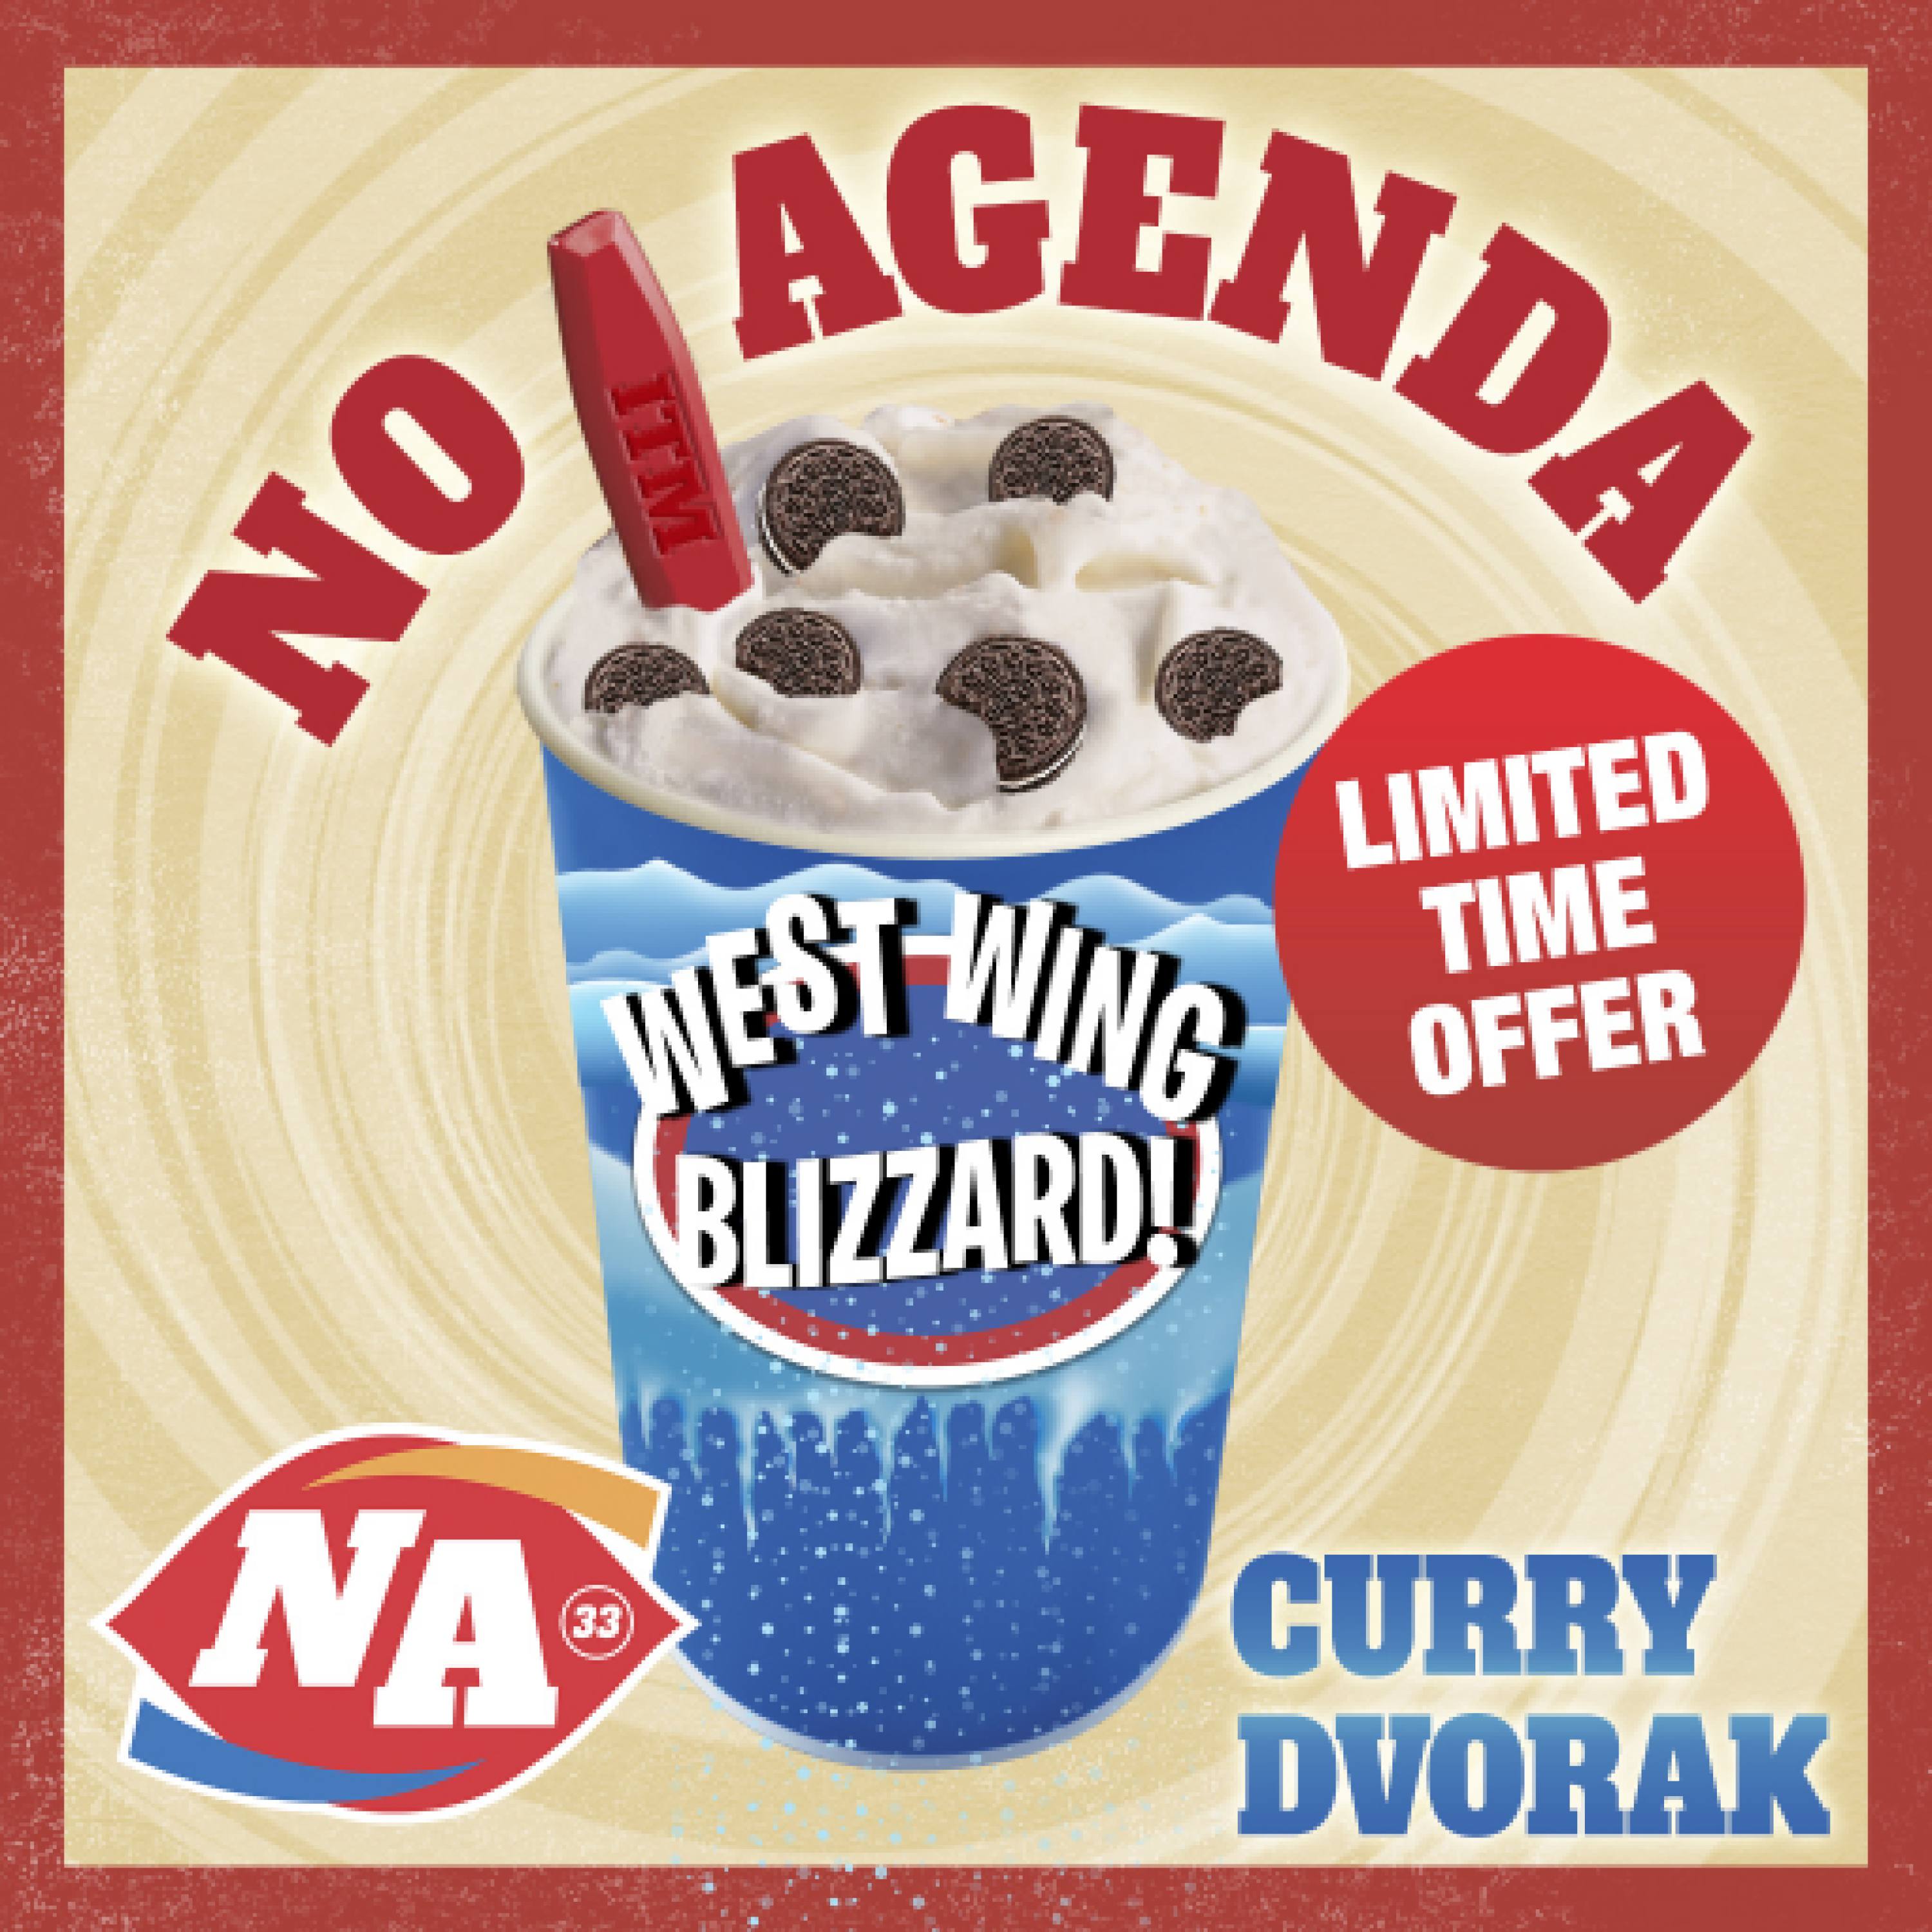 West Wing Blizzard by nessworks for 